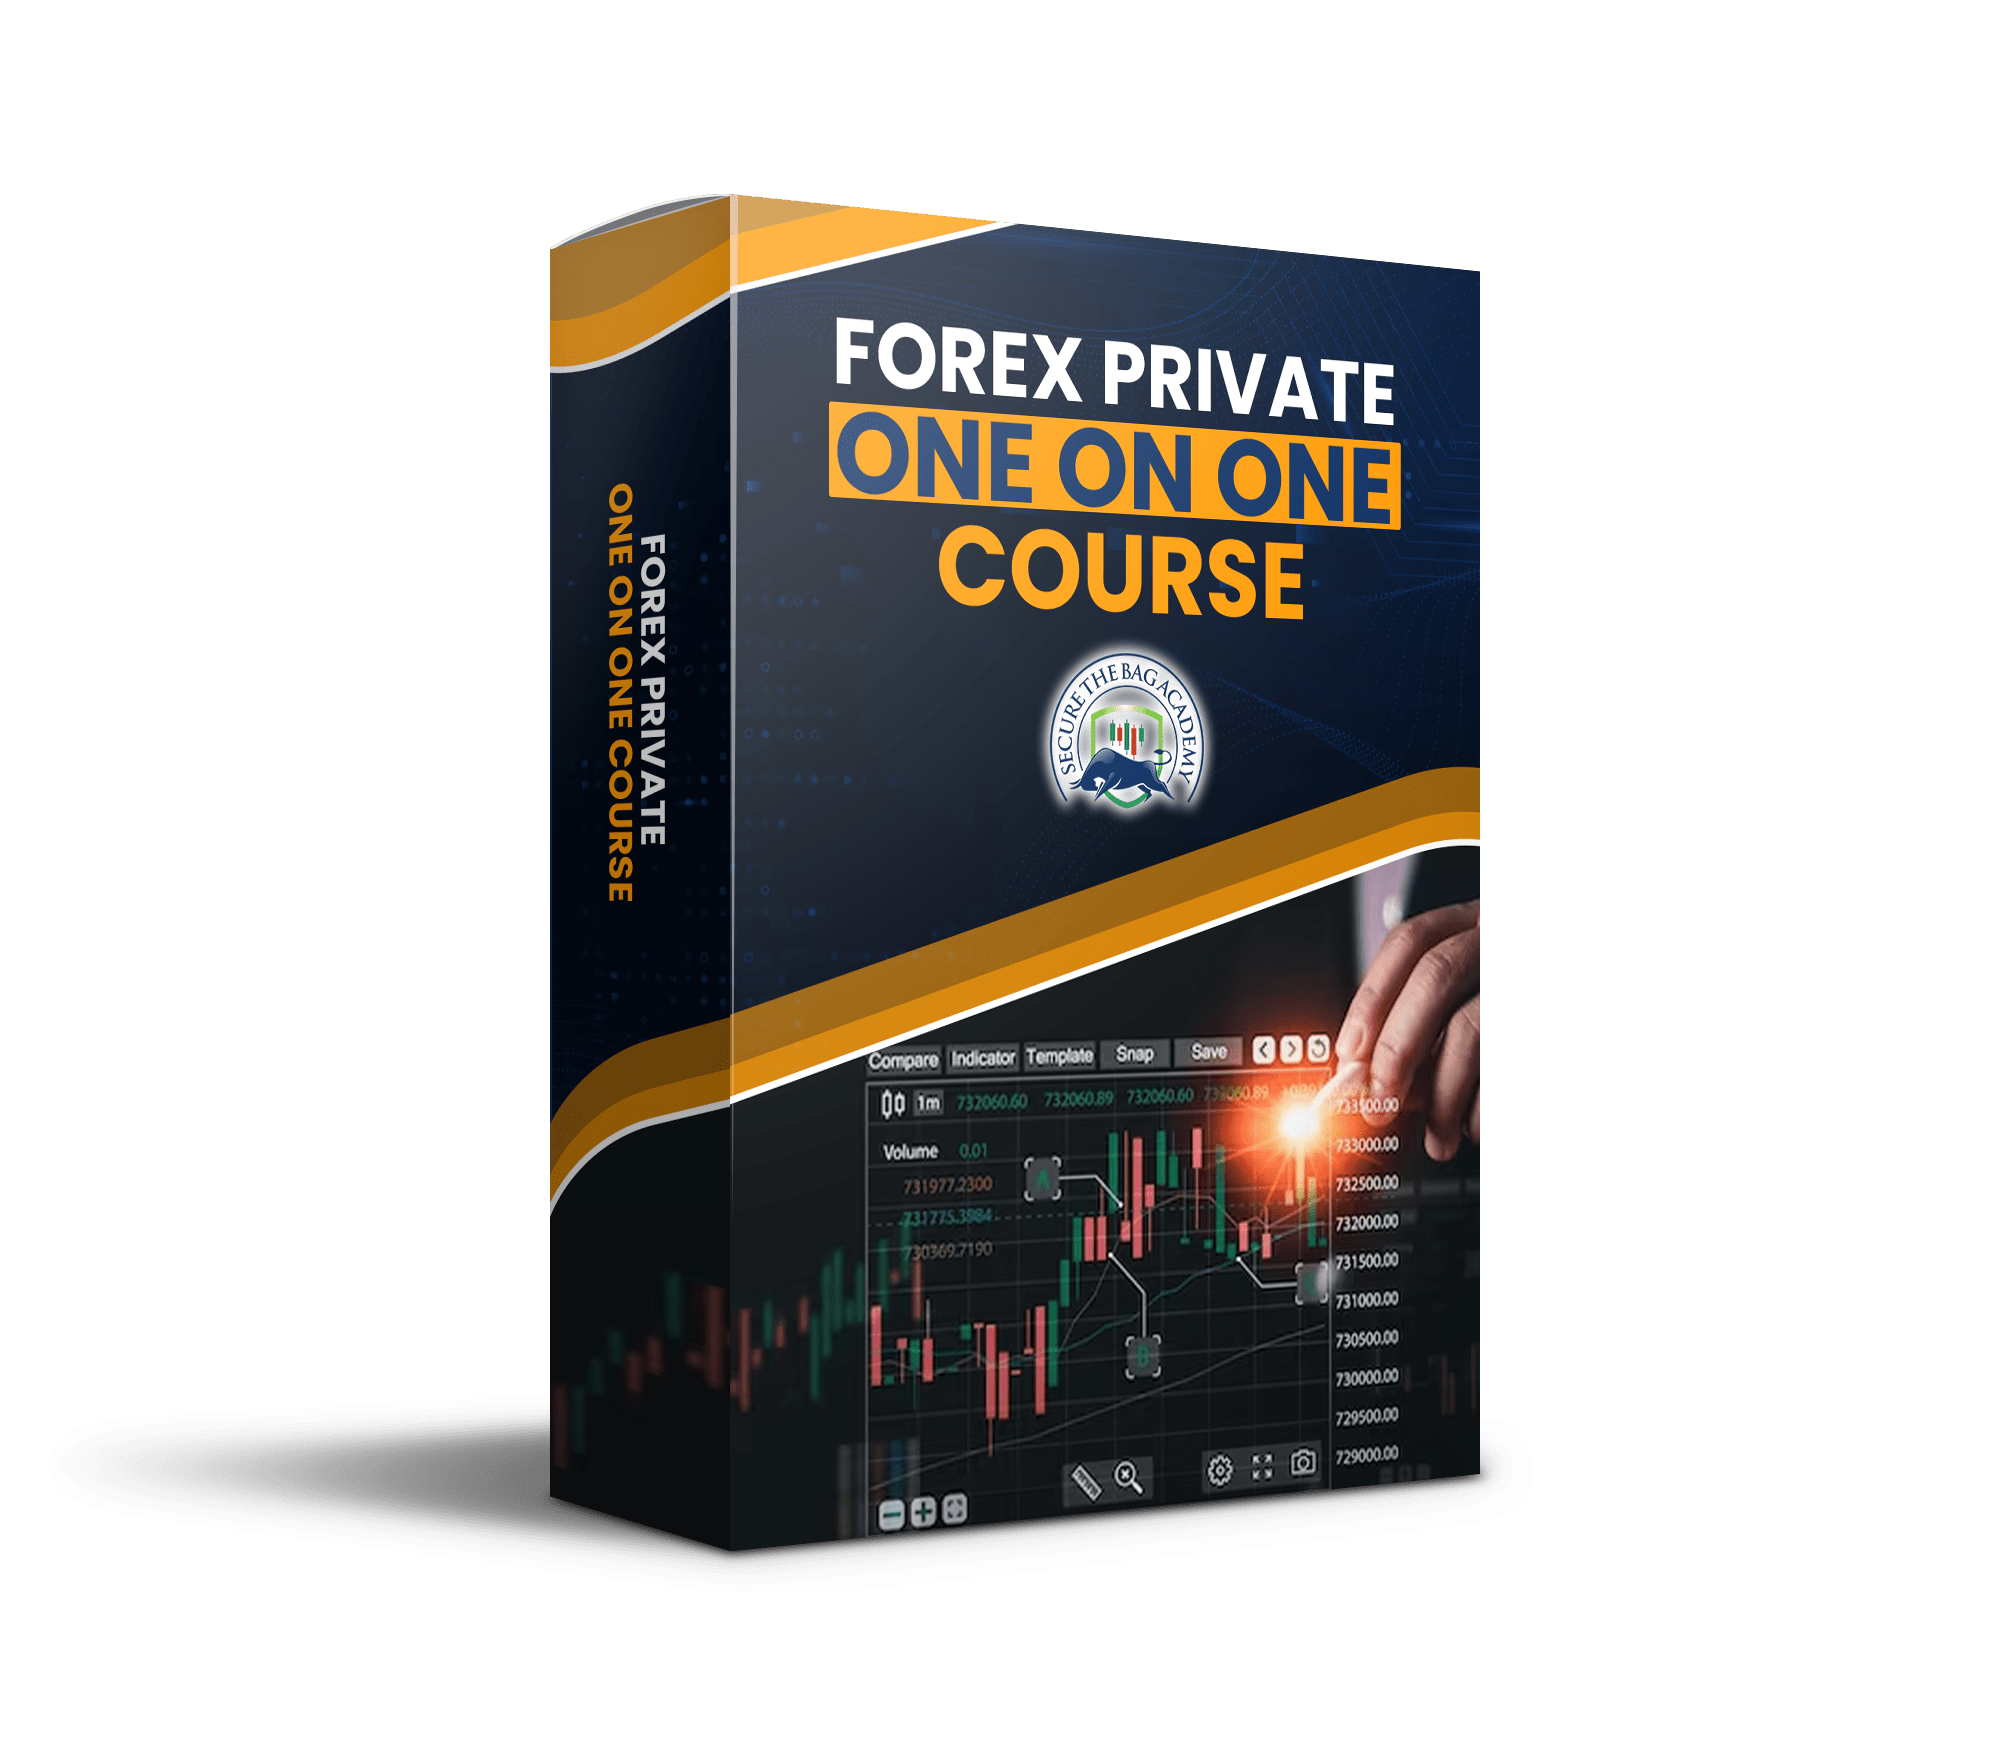 Forex One on One Private Course